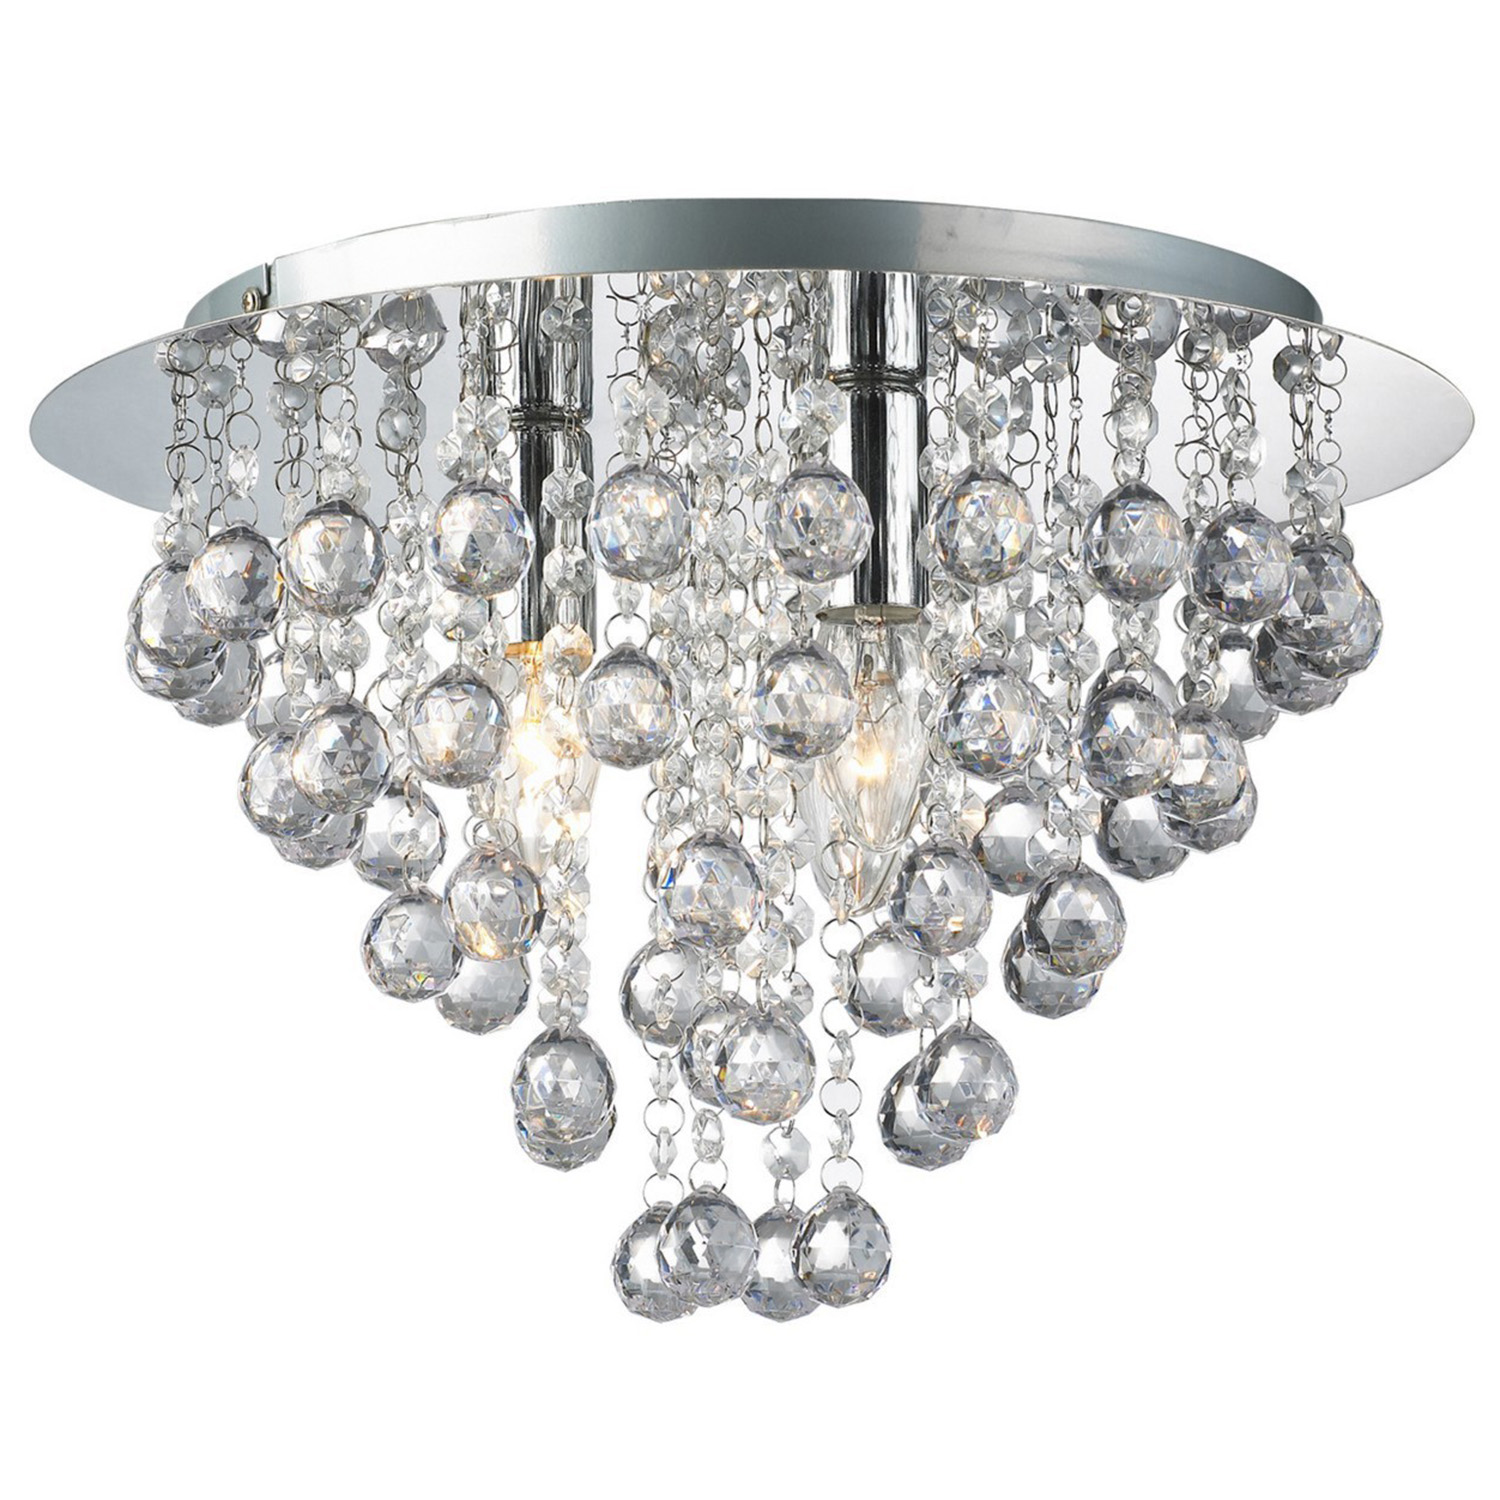 Lexy Silver 3 Light Fitting Ceiling Light Image 1